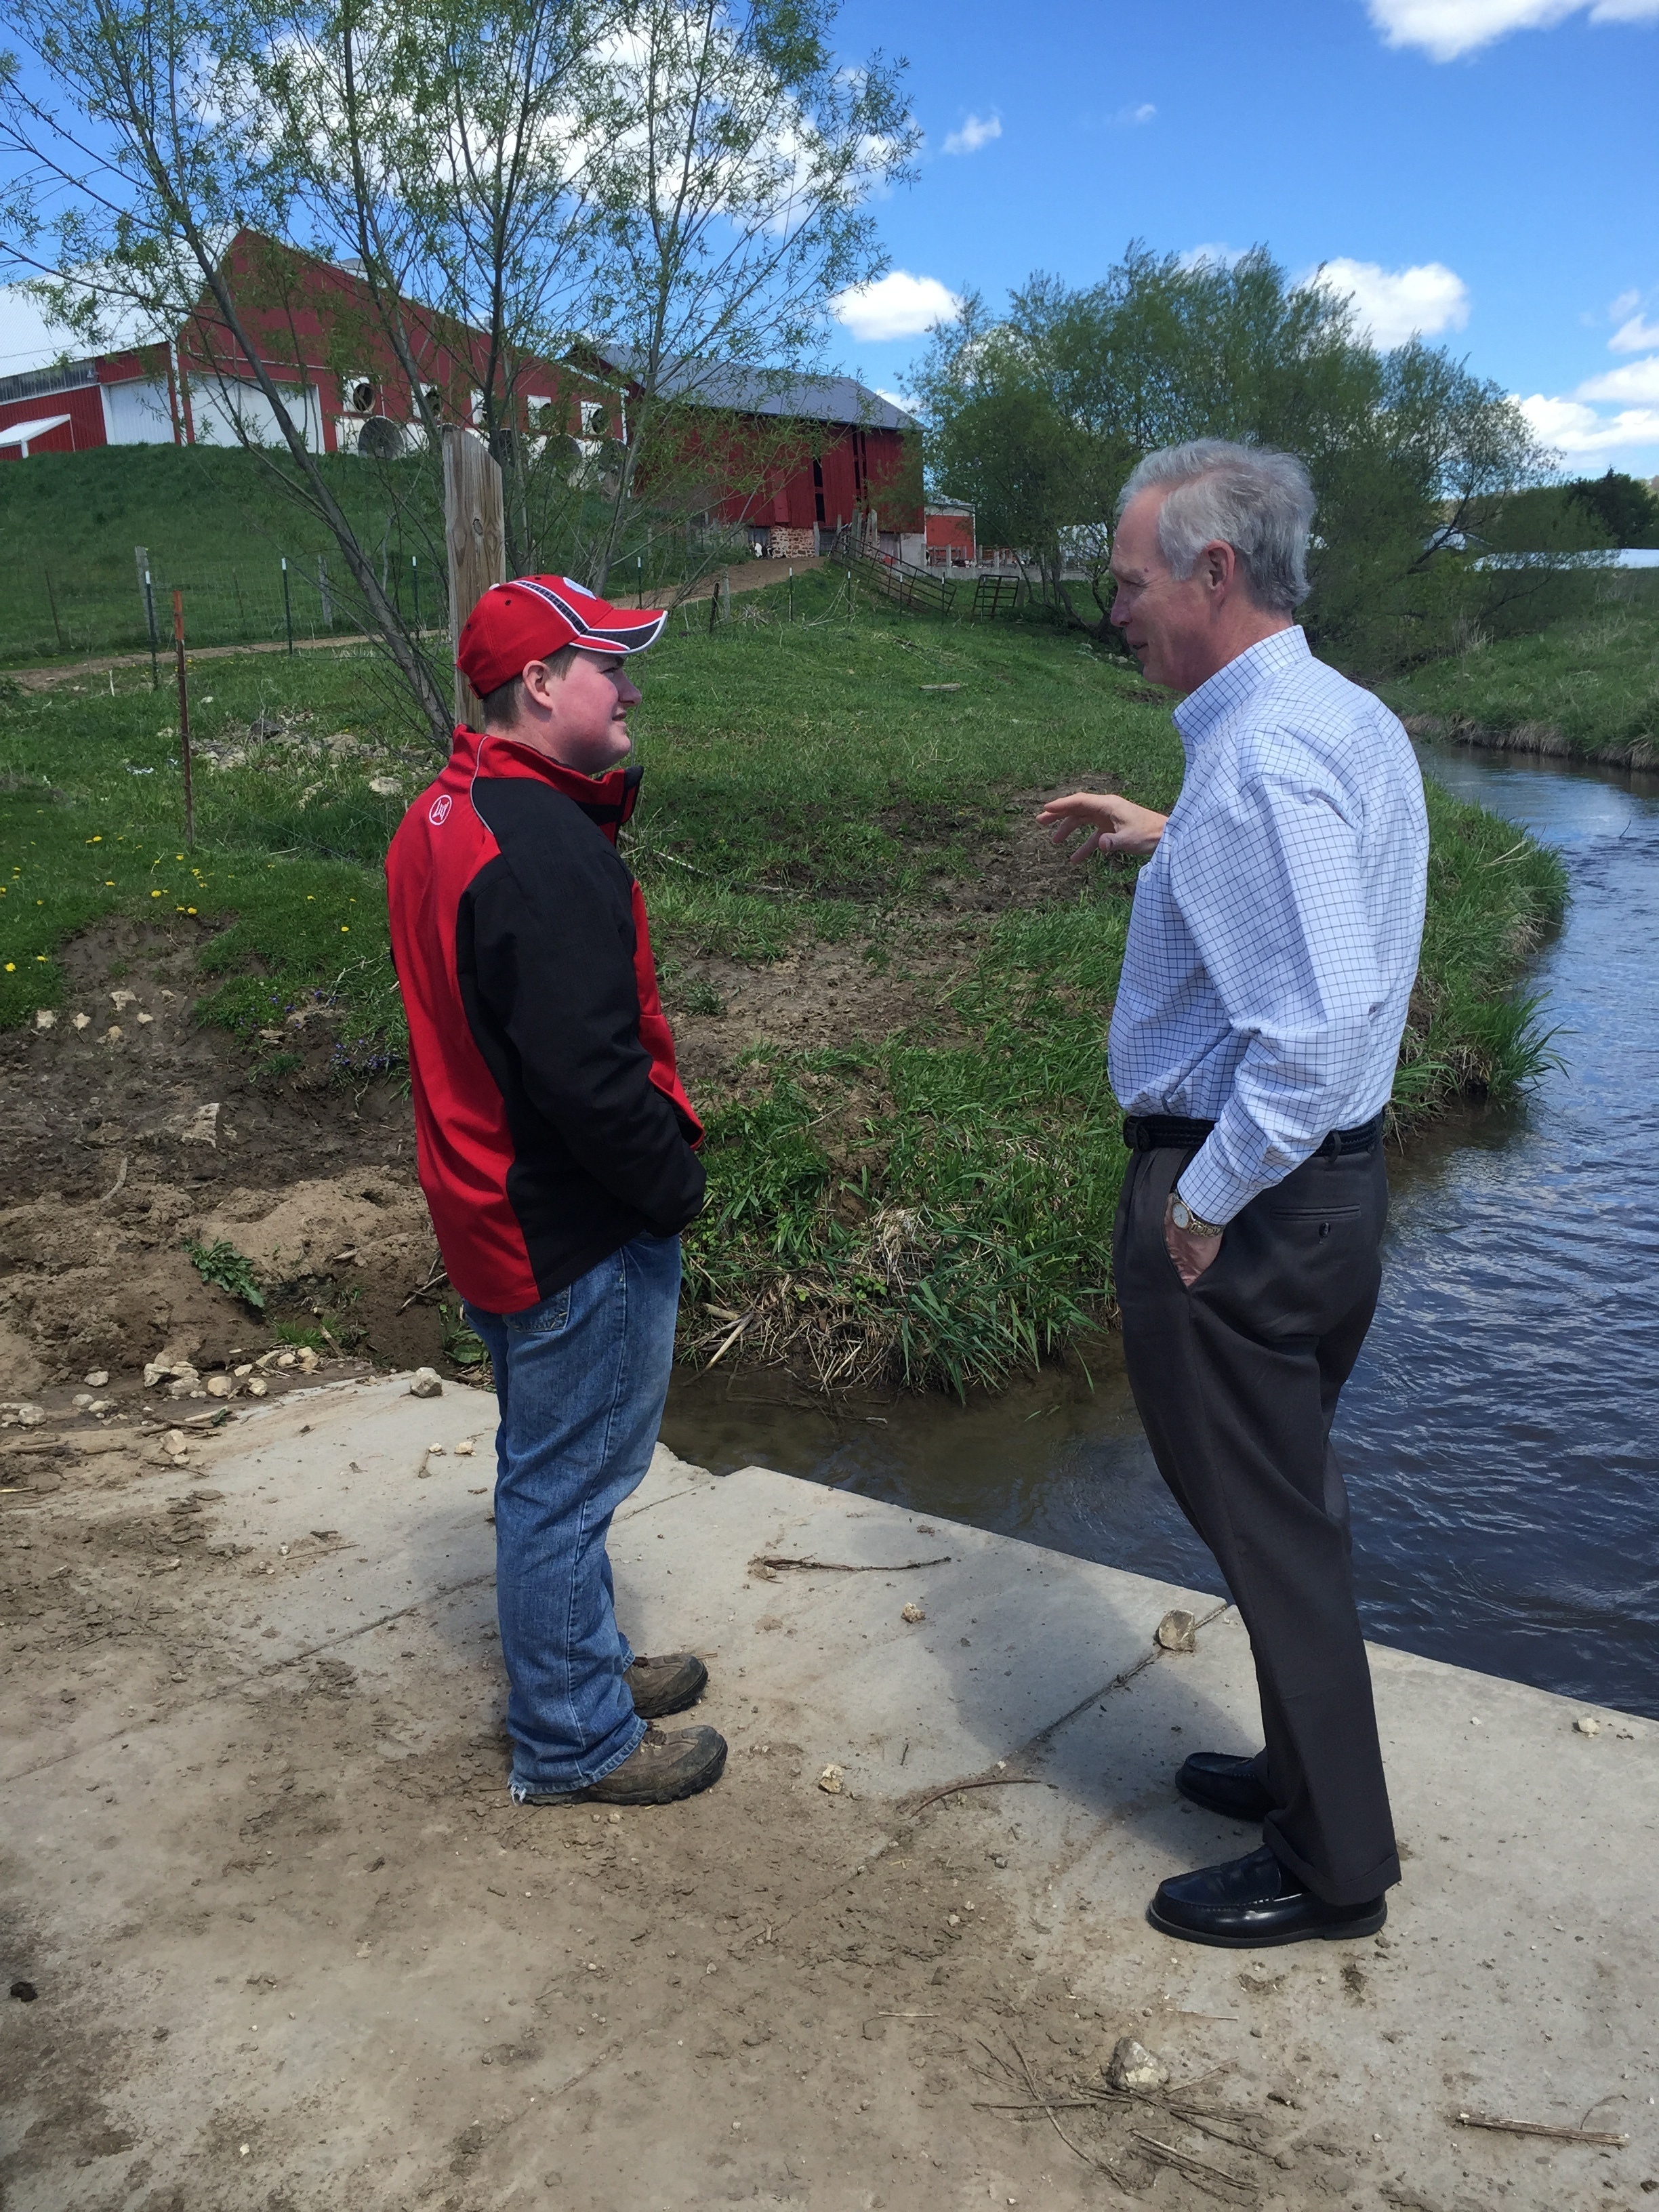 #RonOntheRoad: Ron Johnson at the Lane Creek Dairy in Barre Mills, WI